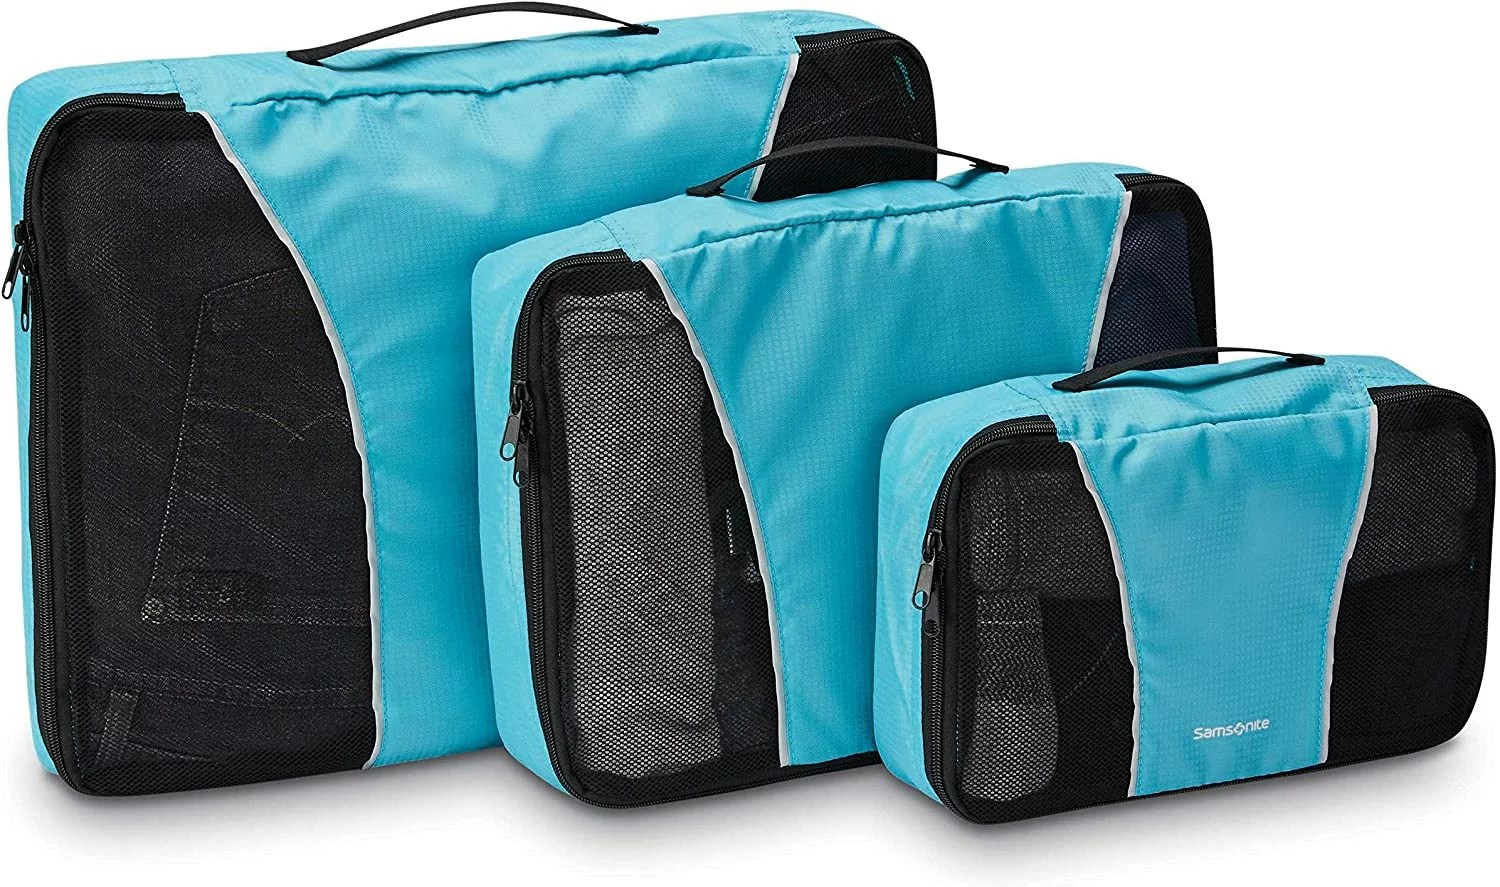 photo of three turquoise blue packing cubes